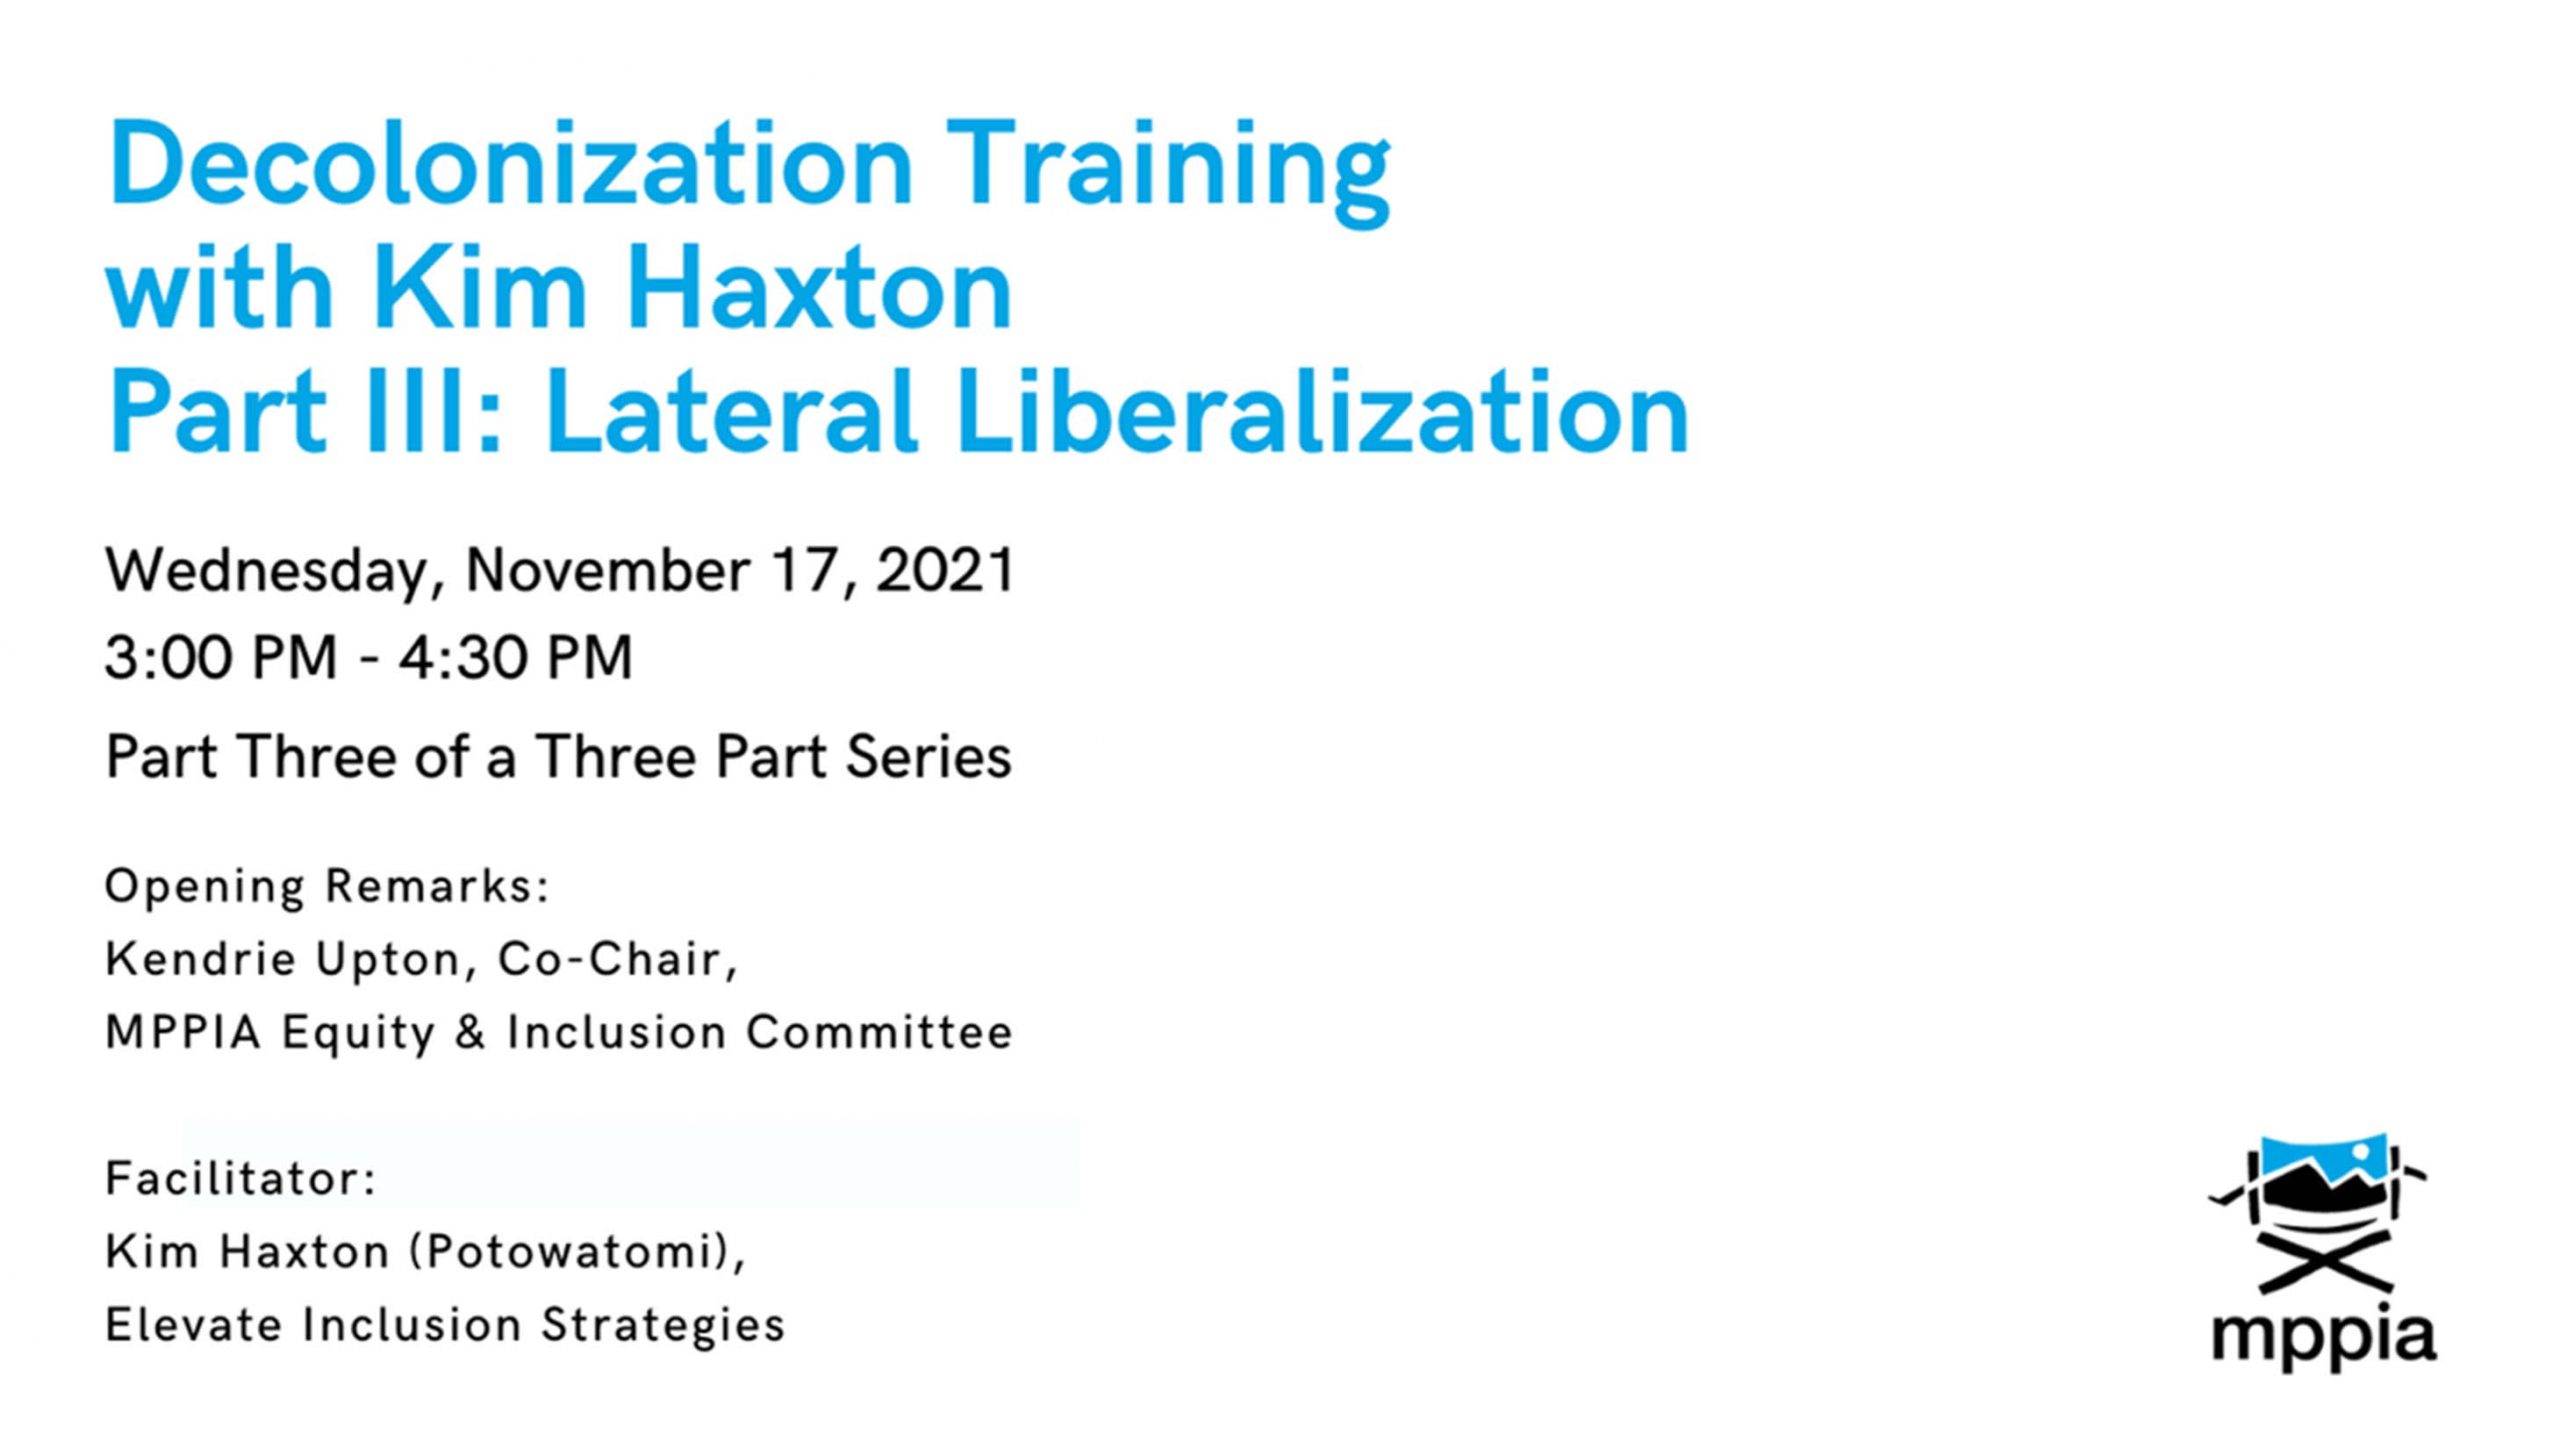 Decolonization Training with Kim Haxton Part III: Lateral Liberalization